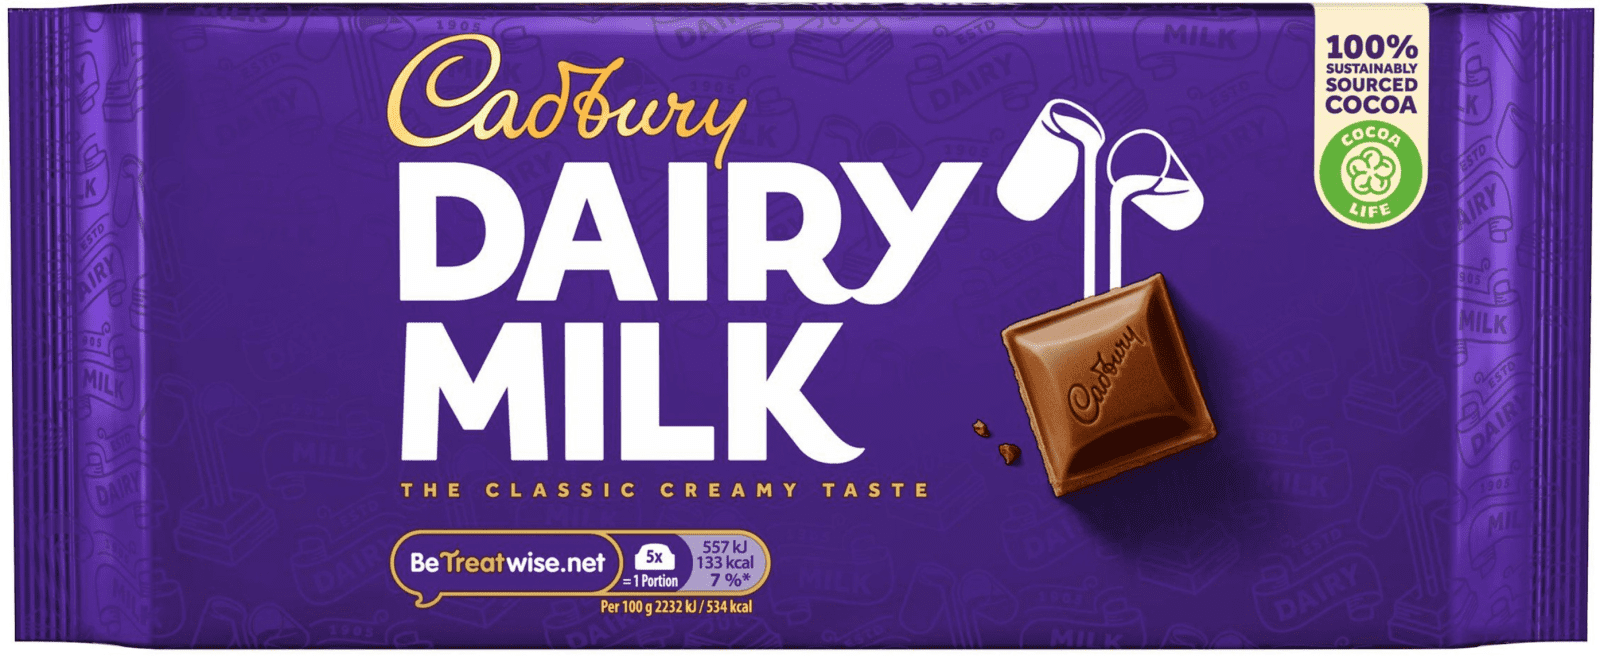 Cadbury has now shrunk the size of a Dairy Milk bar &#8211; but kept the price the same, The Manc